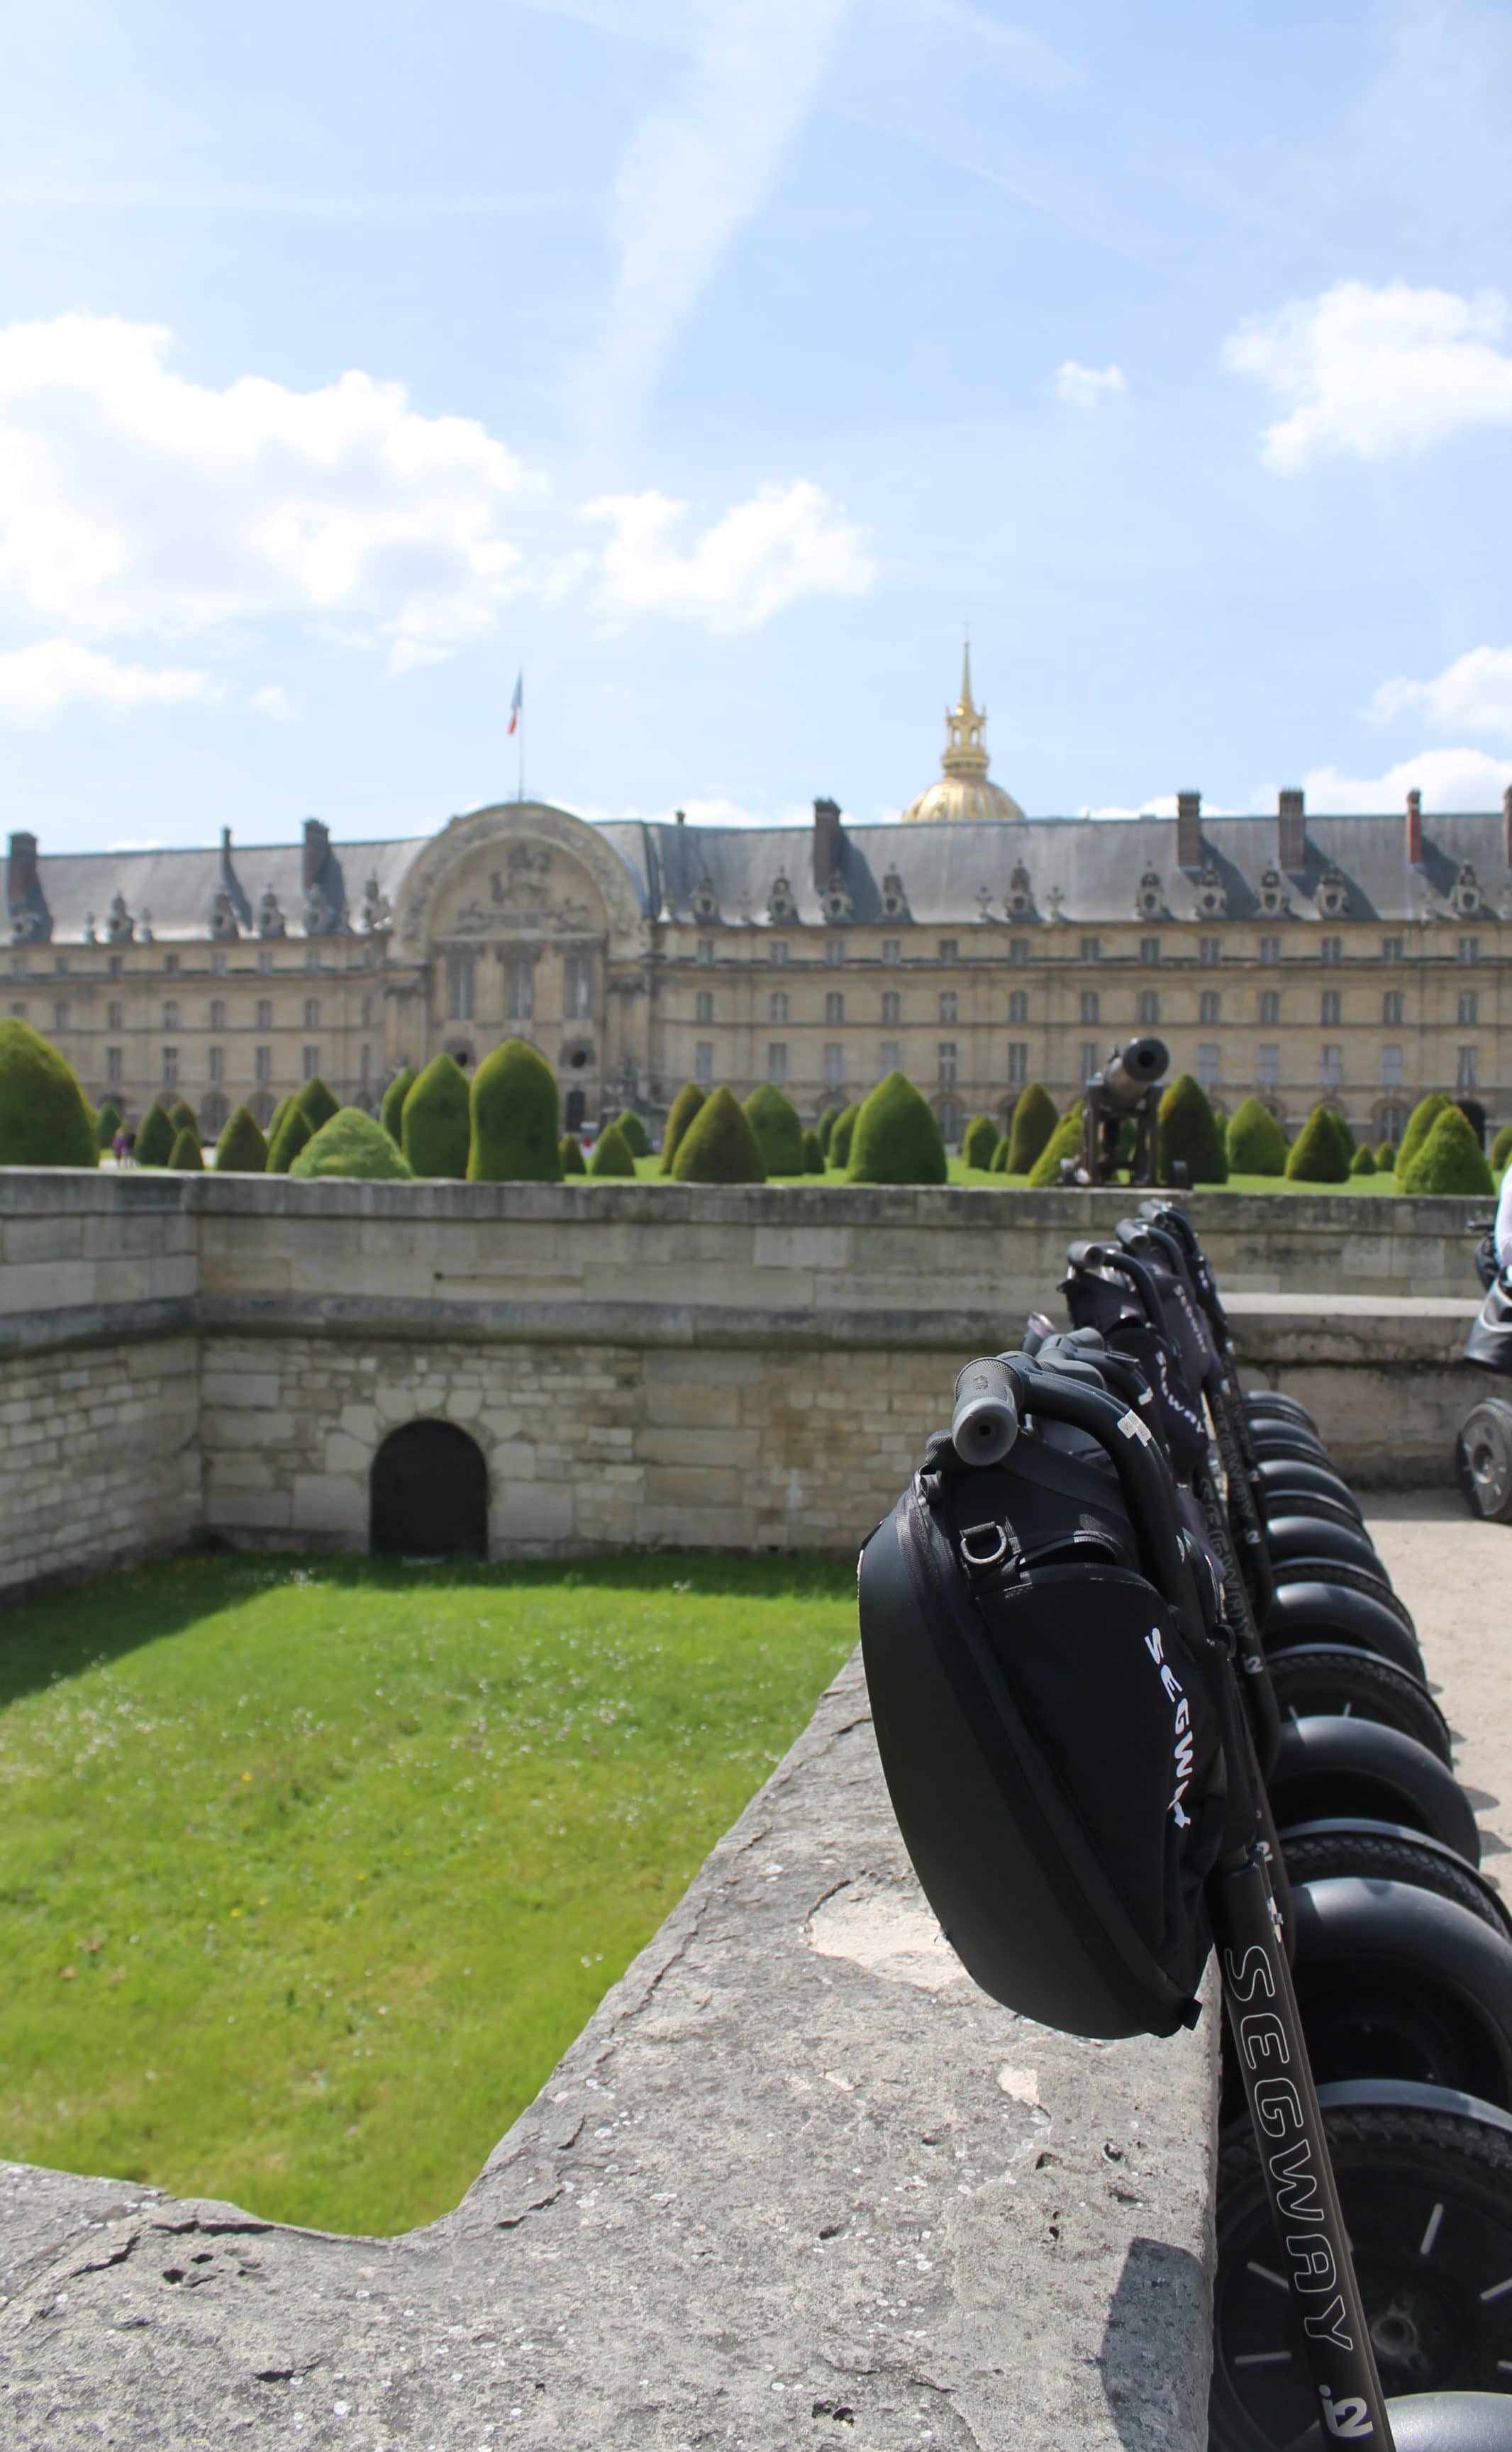 Segways lined up during a stop at the Hotel des Invalides on a Fat Tire Segway tour.